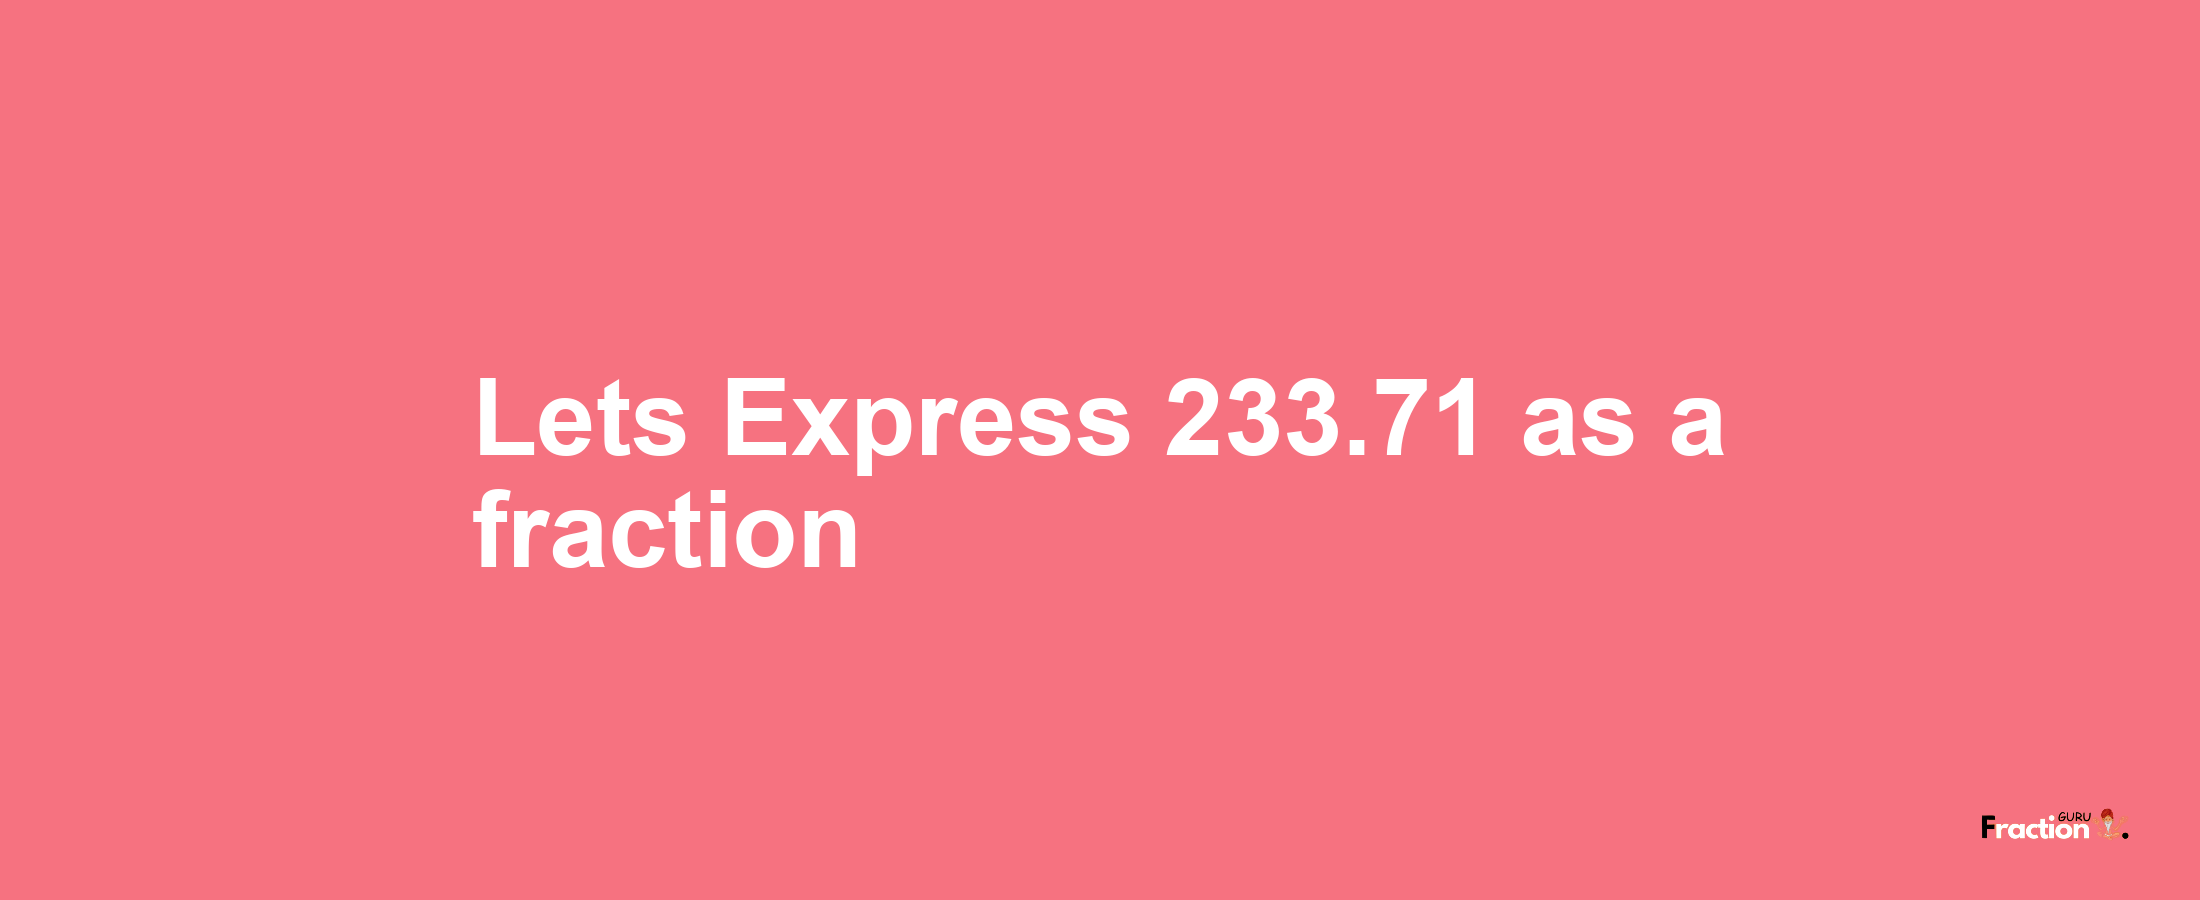 Lets Express 233.71 as afraction